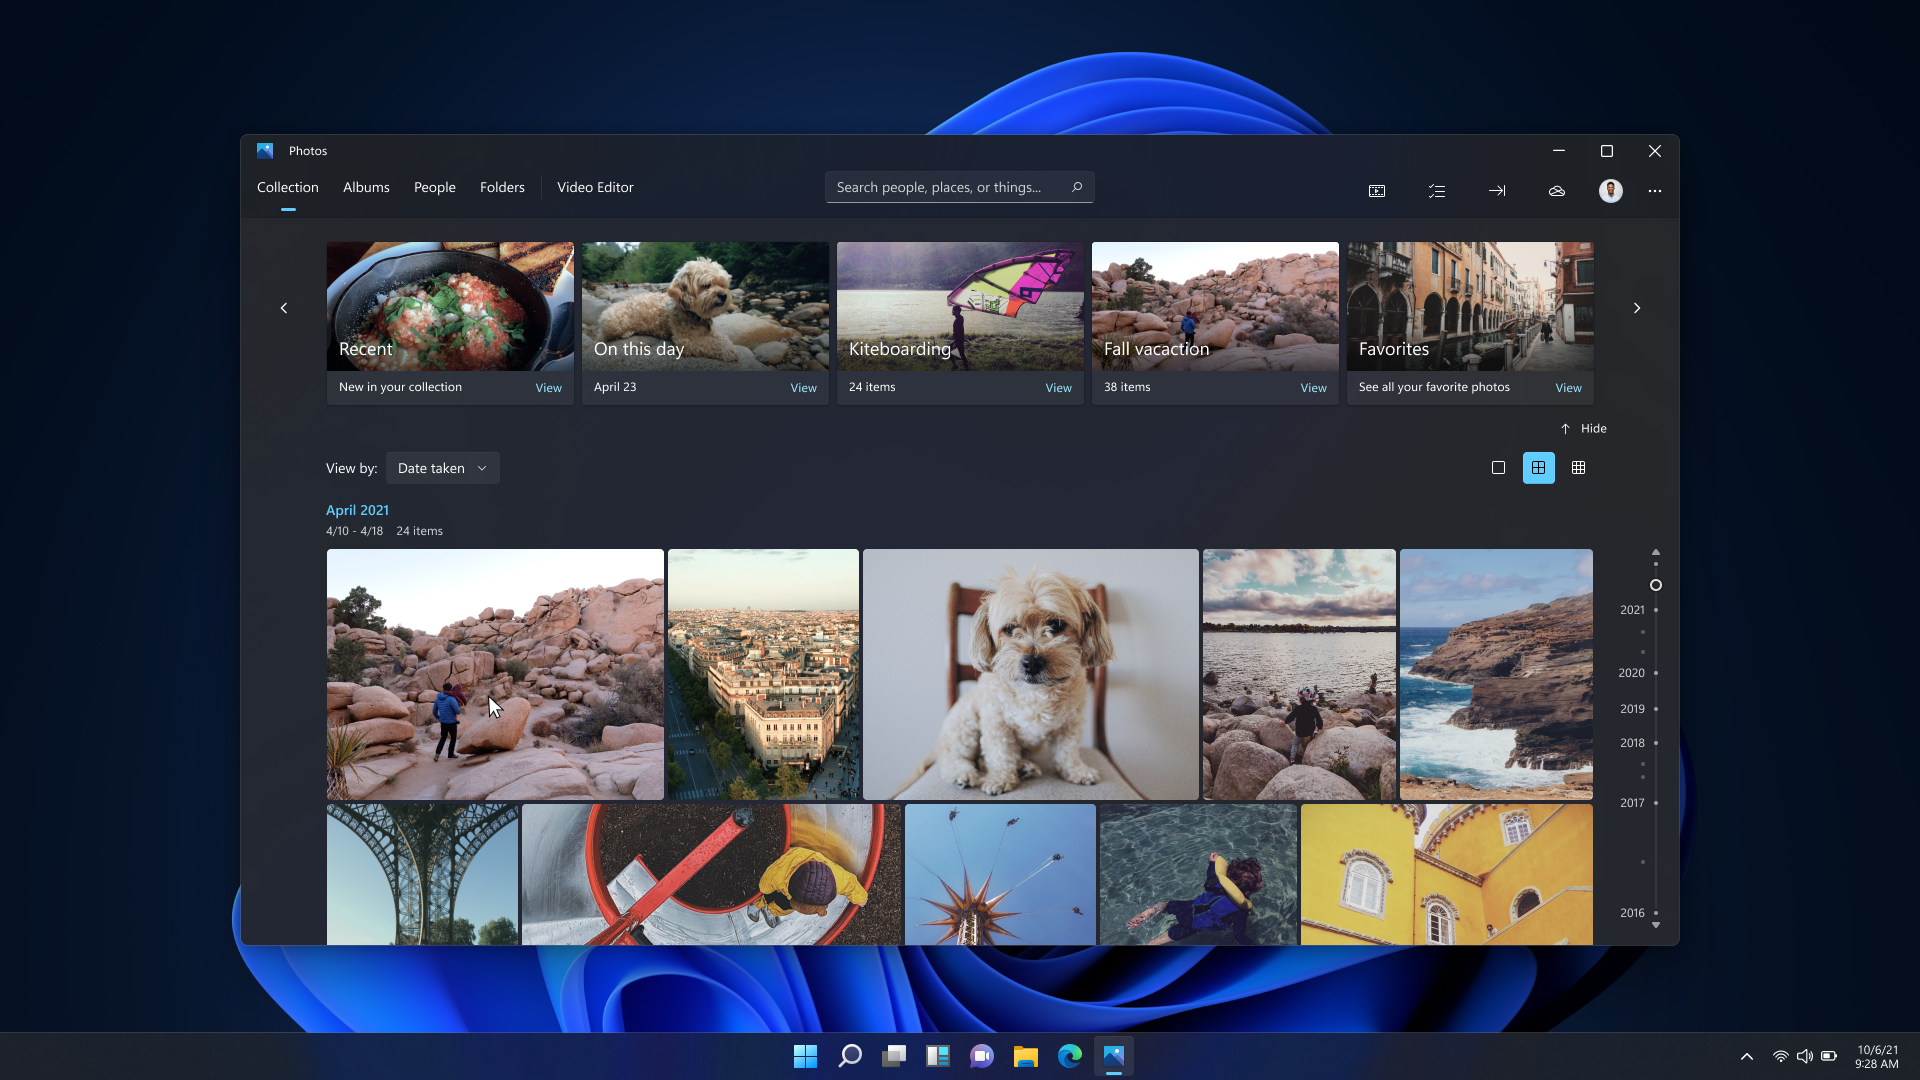 The beautiful new design of the Photos app on Windows 11 in dark mode.